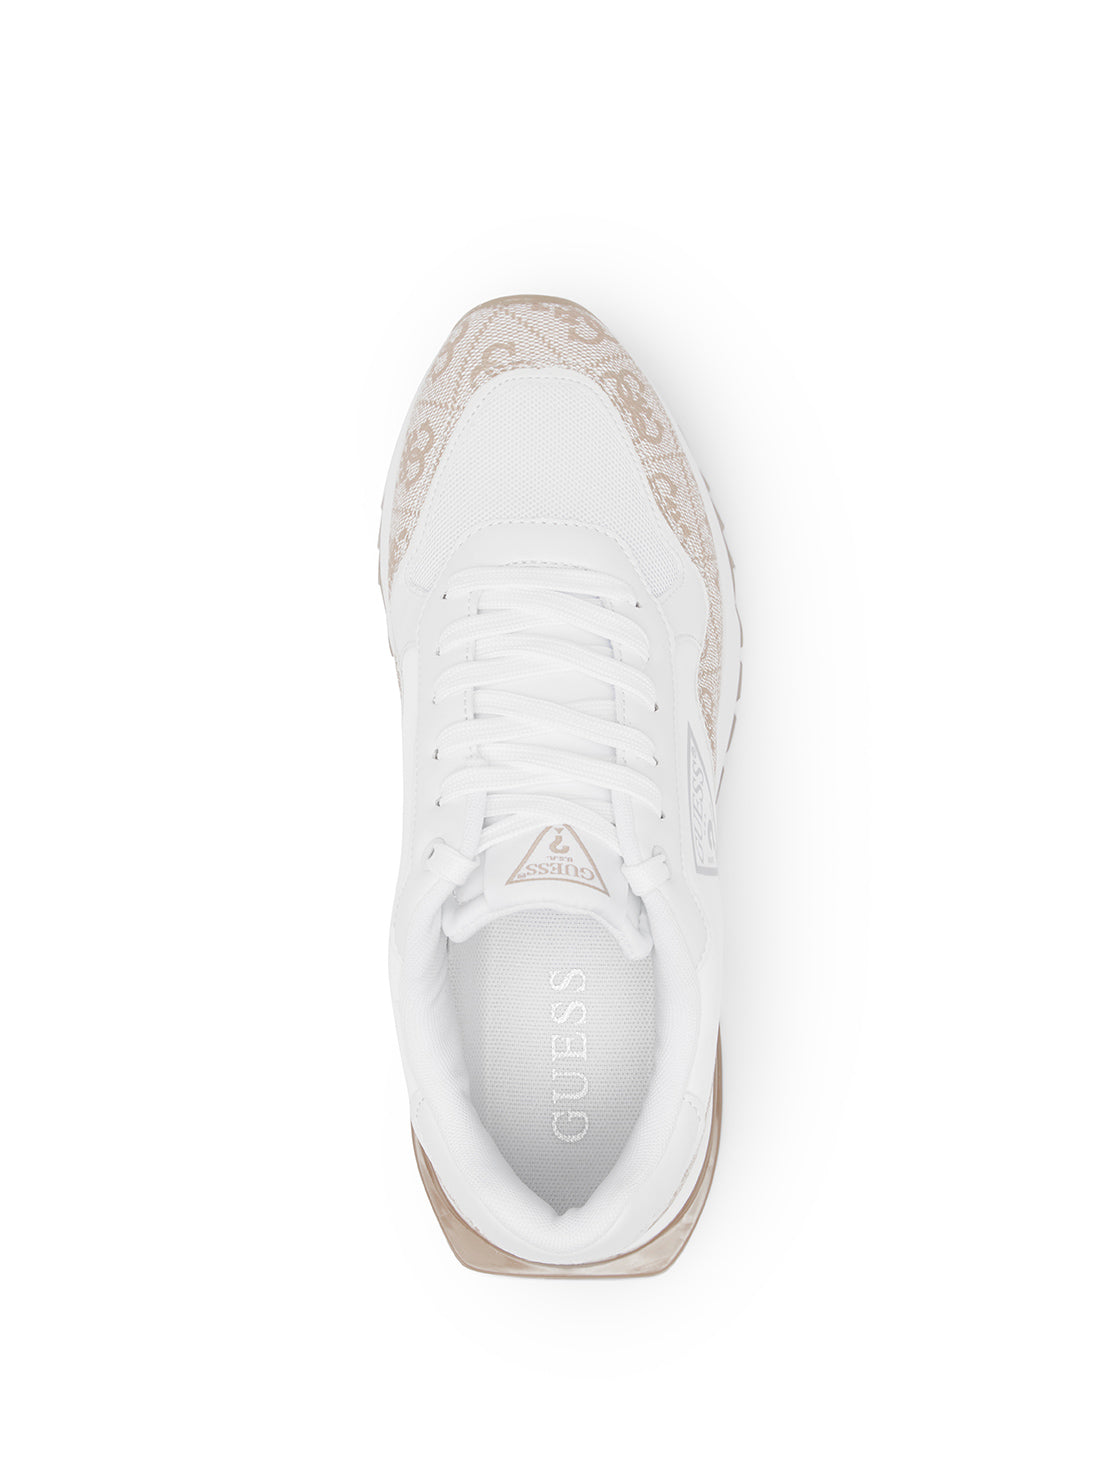 White and Taupe Melany Logo Sneakers | GUESS Women's Shoes | top view